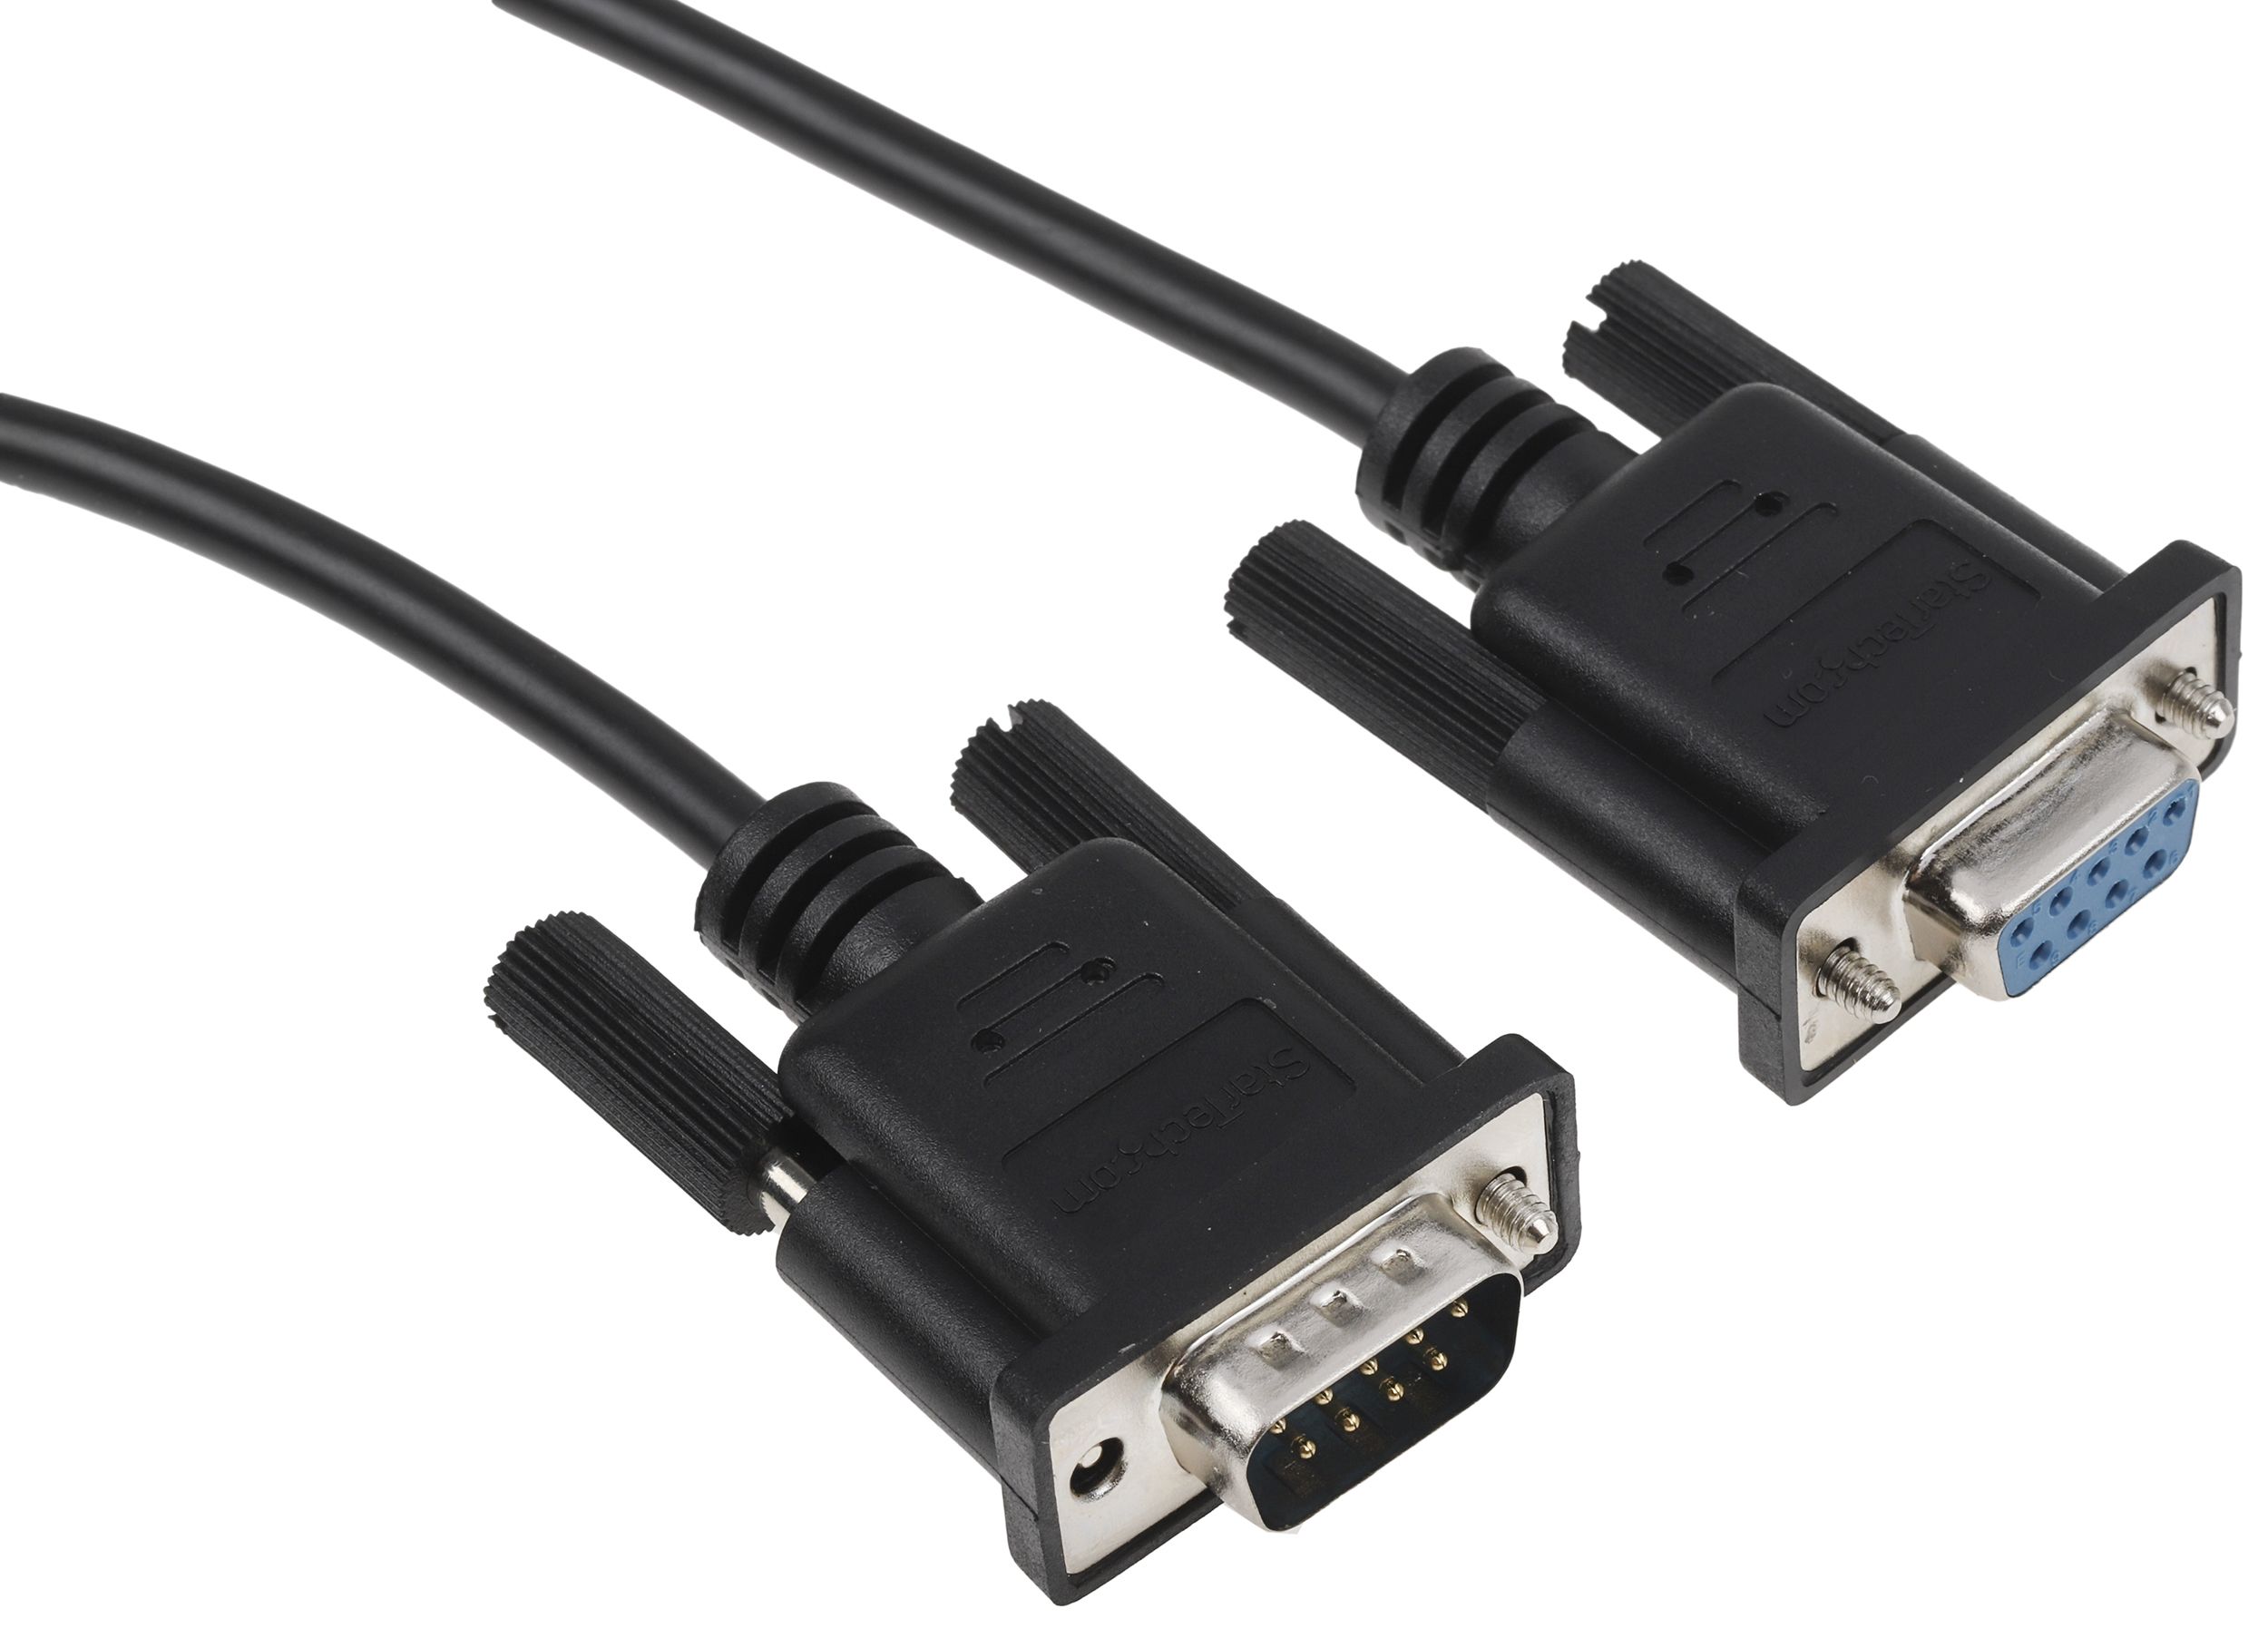 StarTech.com 2m 9 pin D-sub to 9 pin D-sub Serial Cable